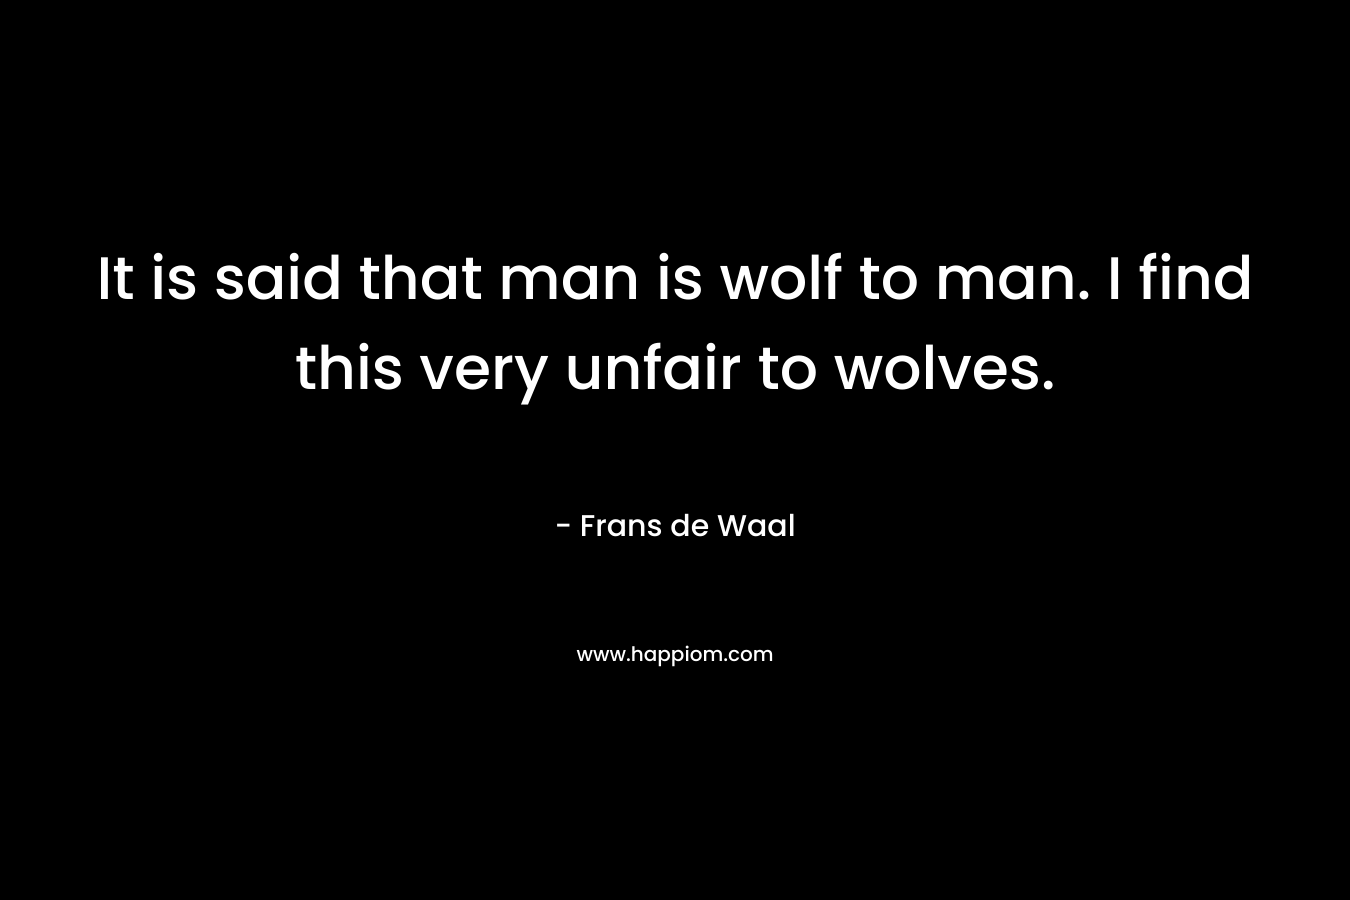 It is said that man is wolf to man. I find this very unfair to wolves. – Frans de Waal